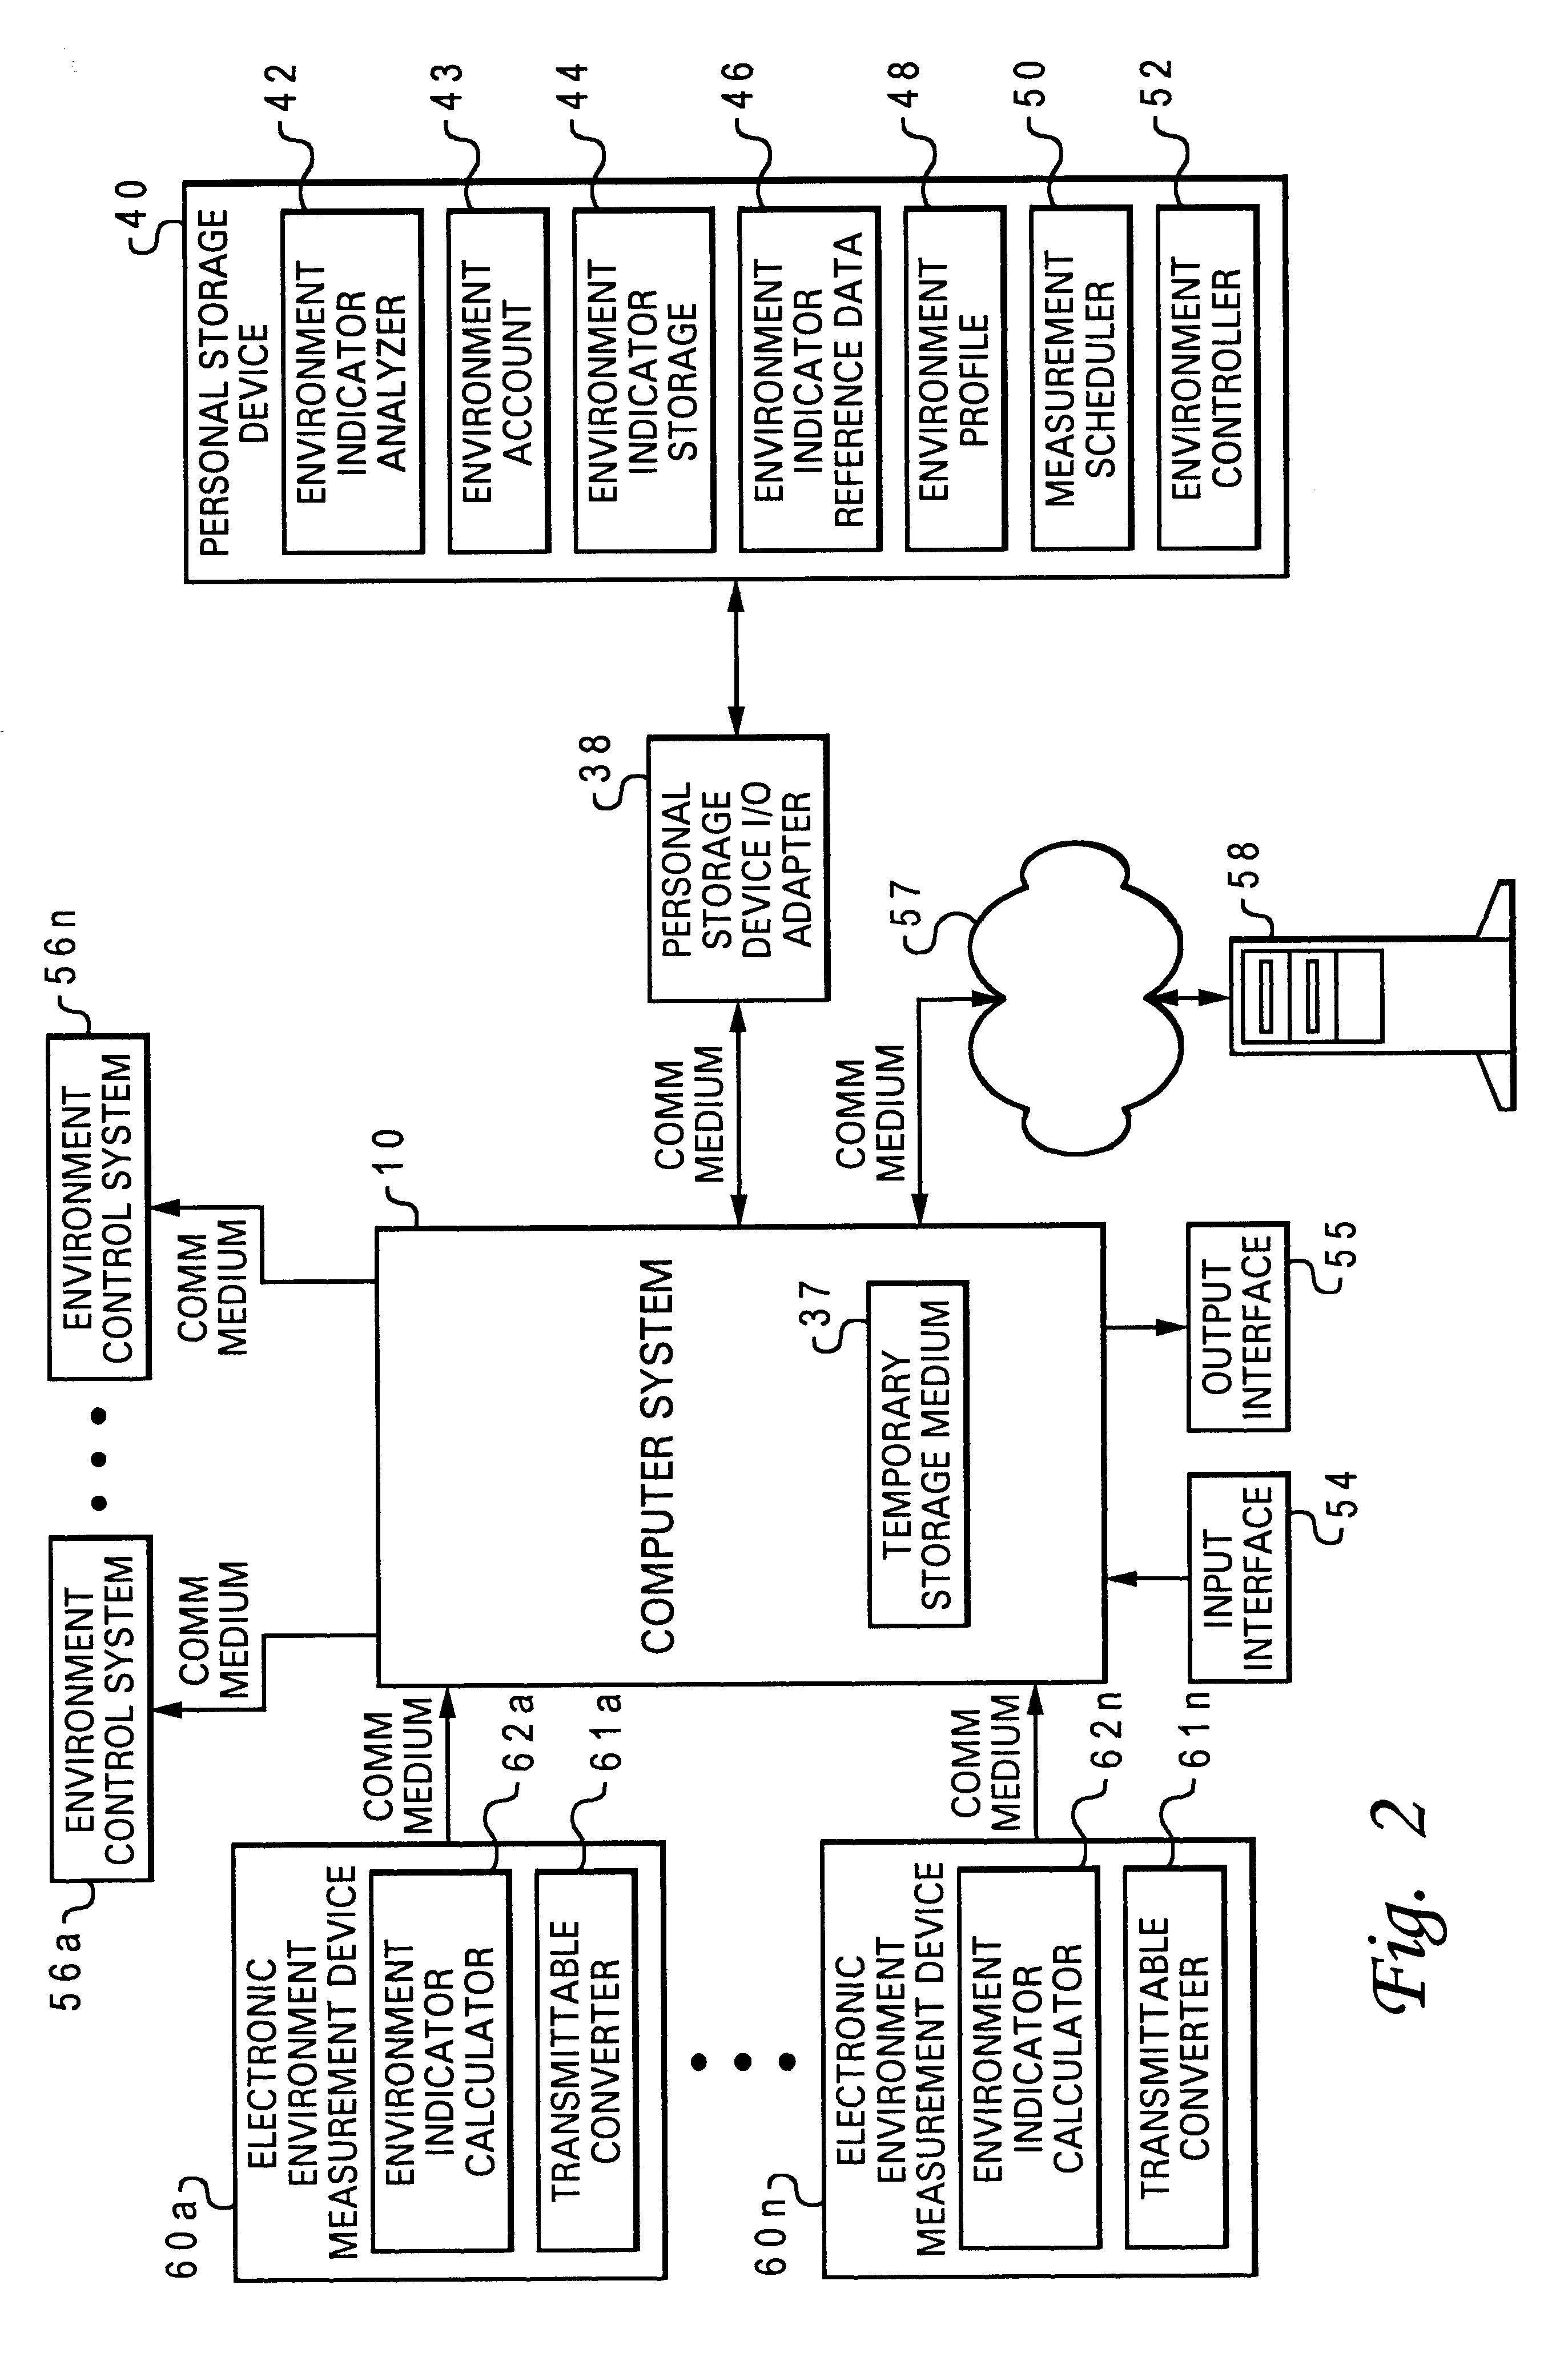 Managing an environment according to environmental preferences retrieved from a personal storage device